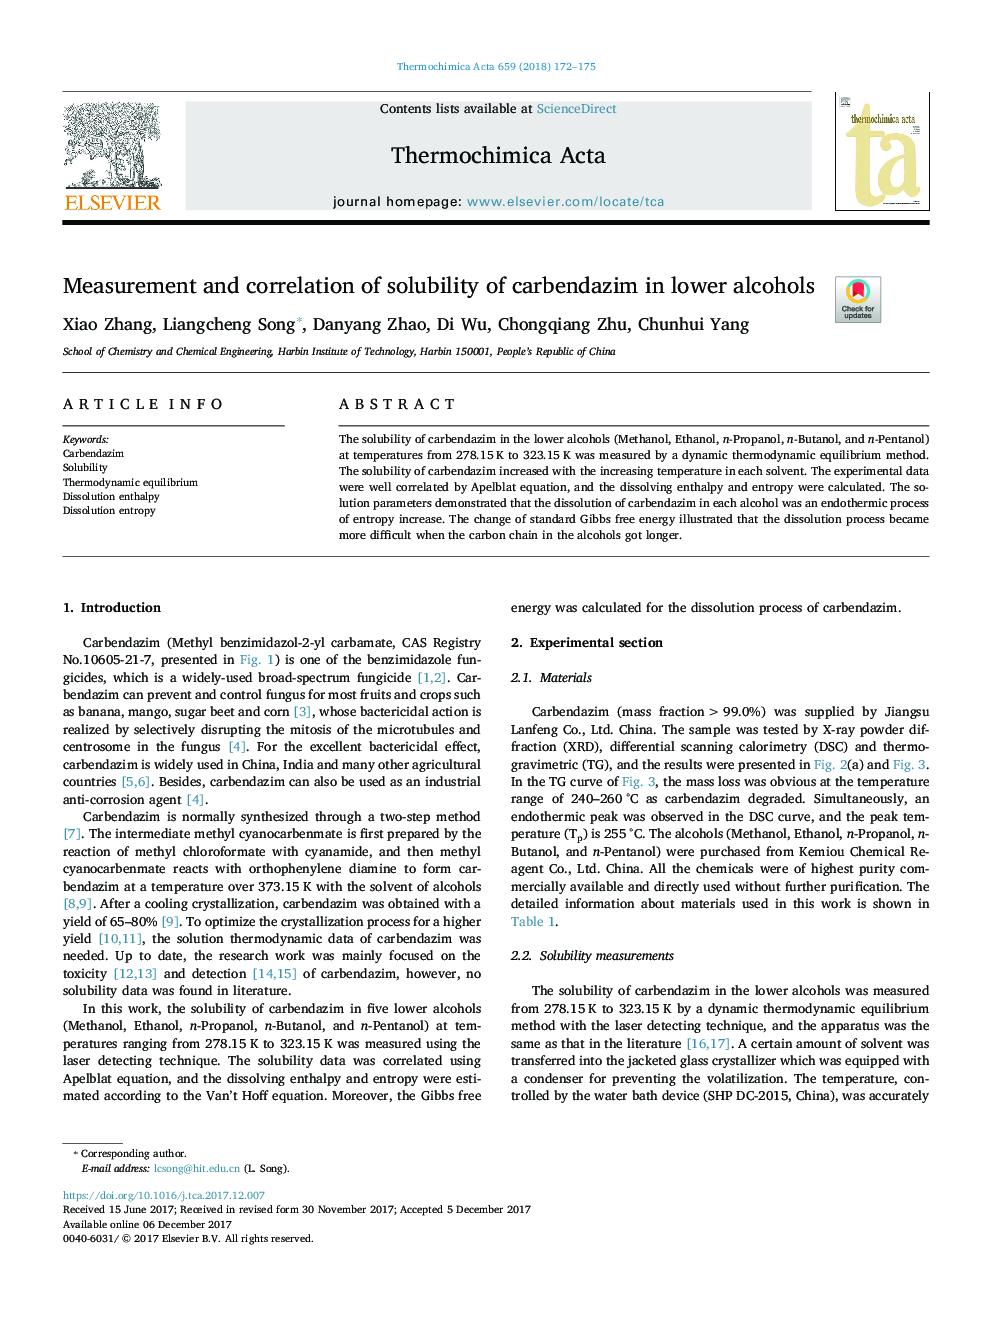 Measurement and correlation of solubility of carbendazim in lower alcohols